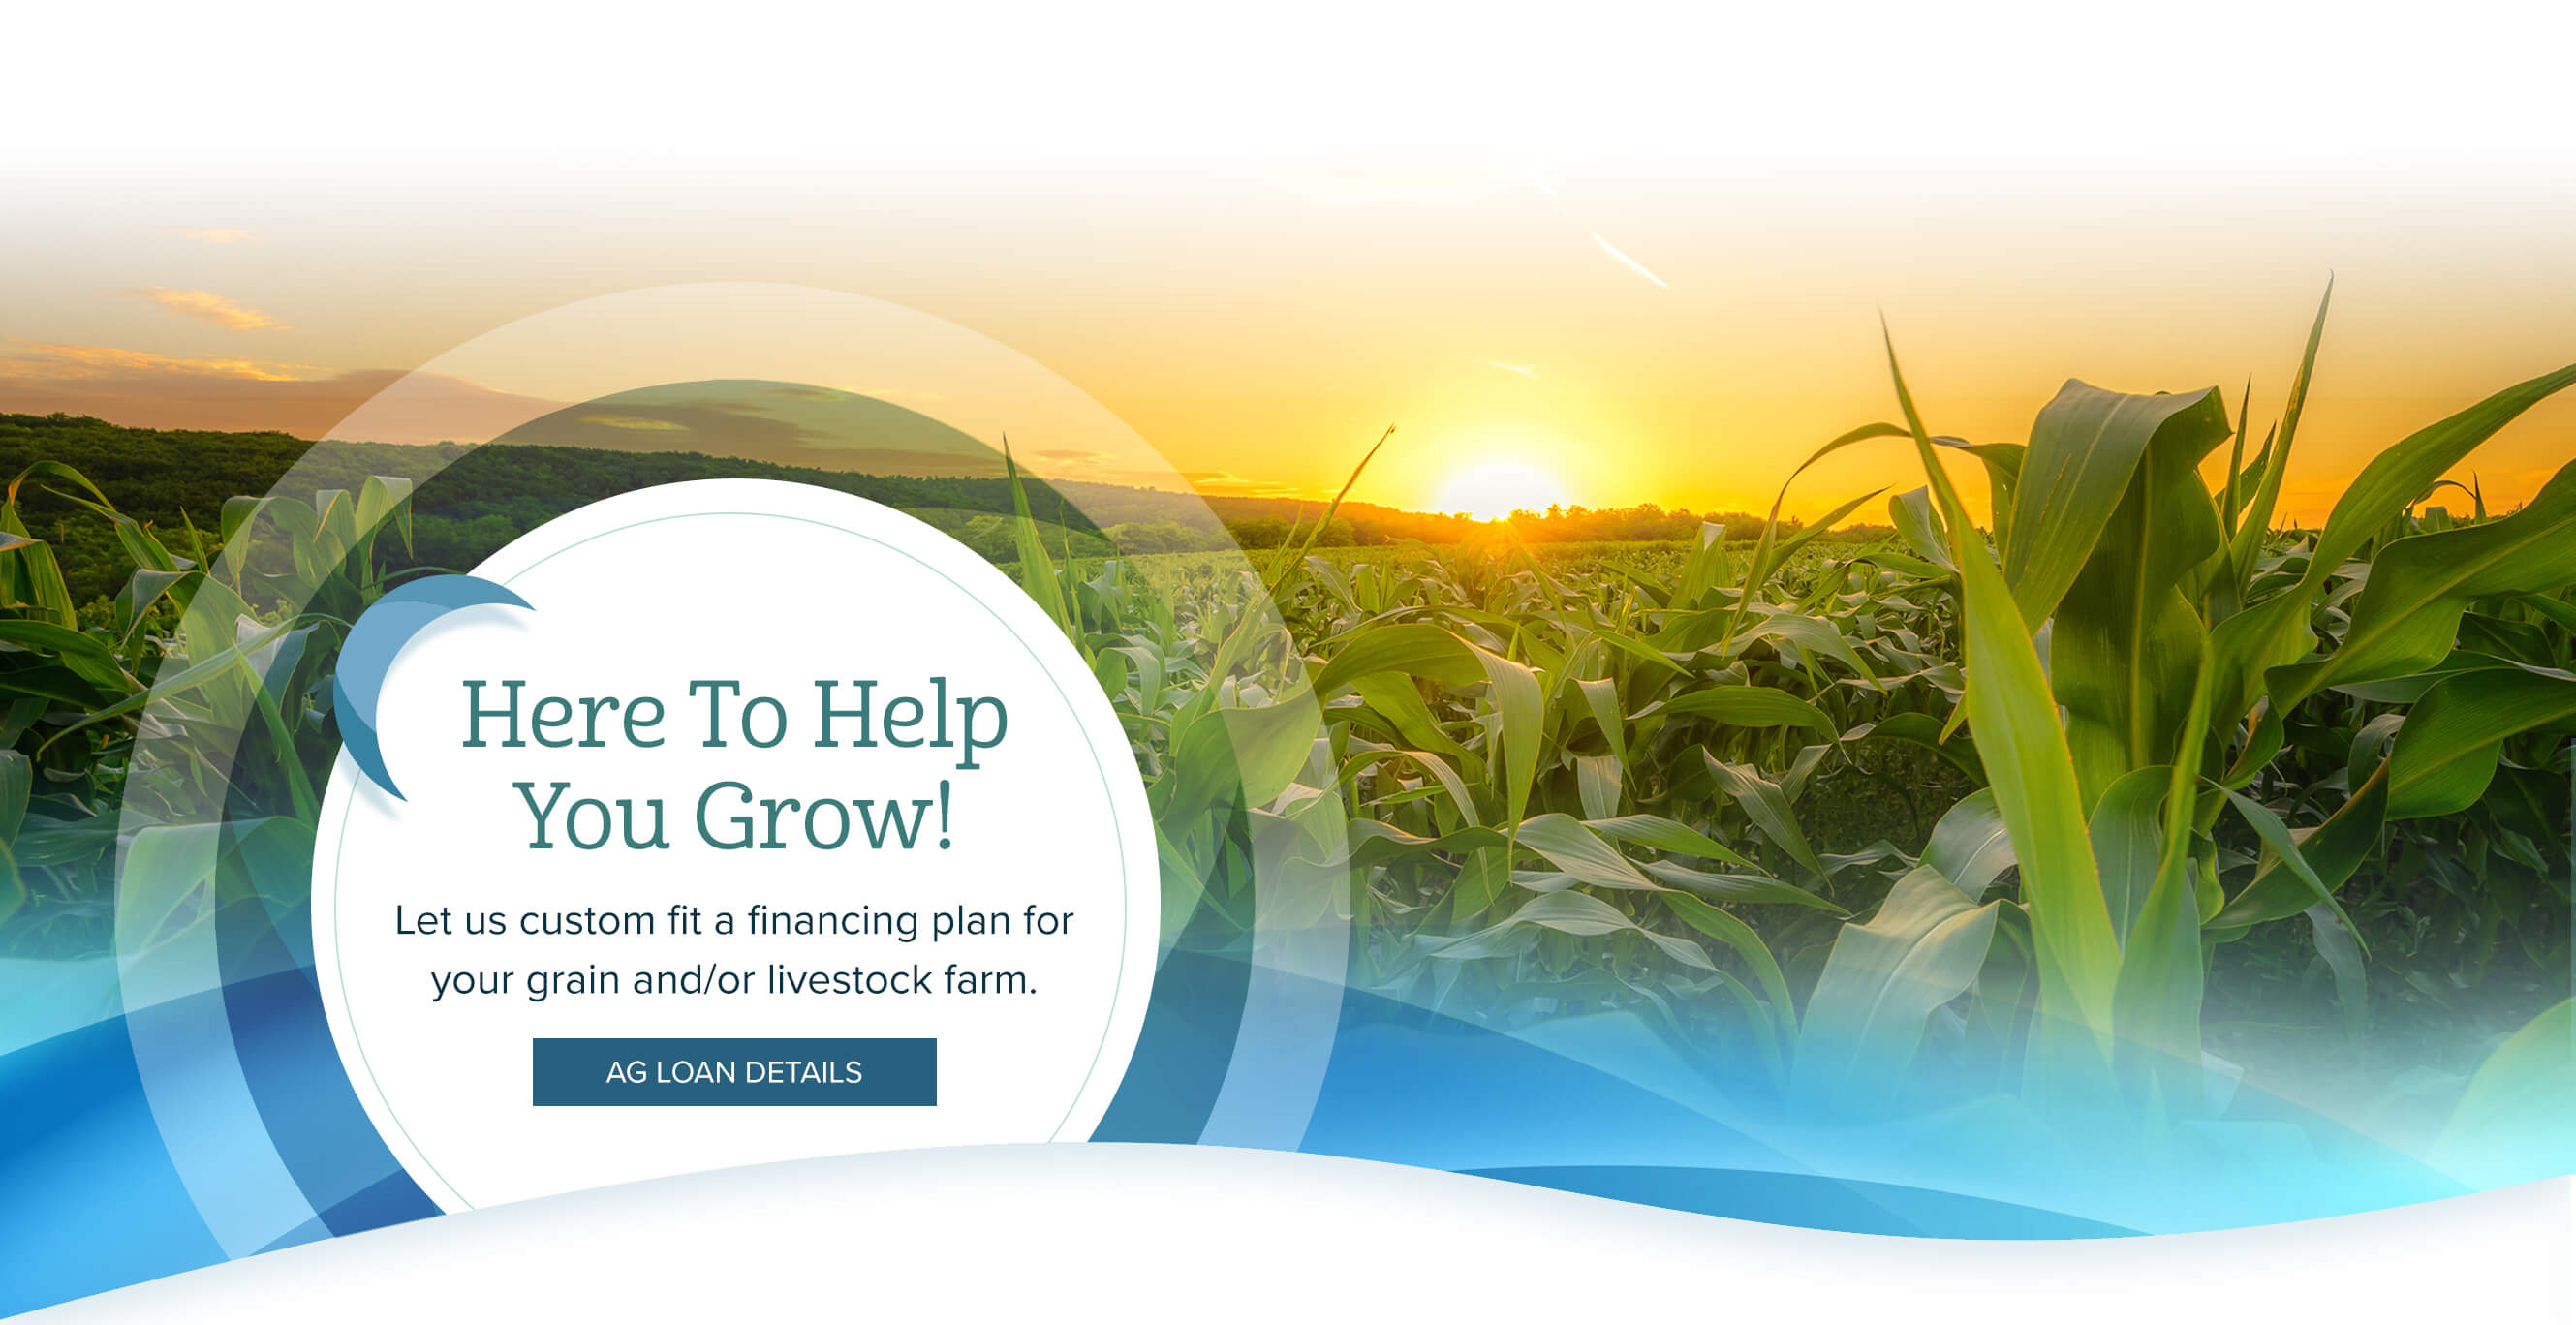 Here To Help You Grow! Let us custom fit a financing plan for your grain and/or livestock farm. Ag Loan Details.